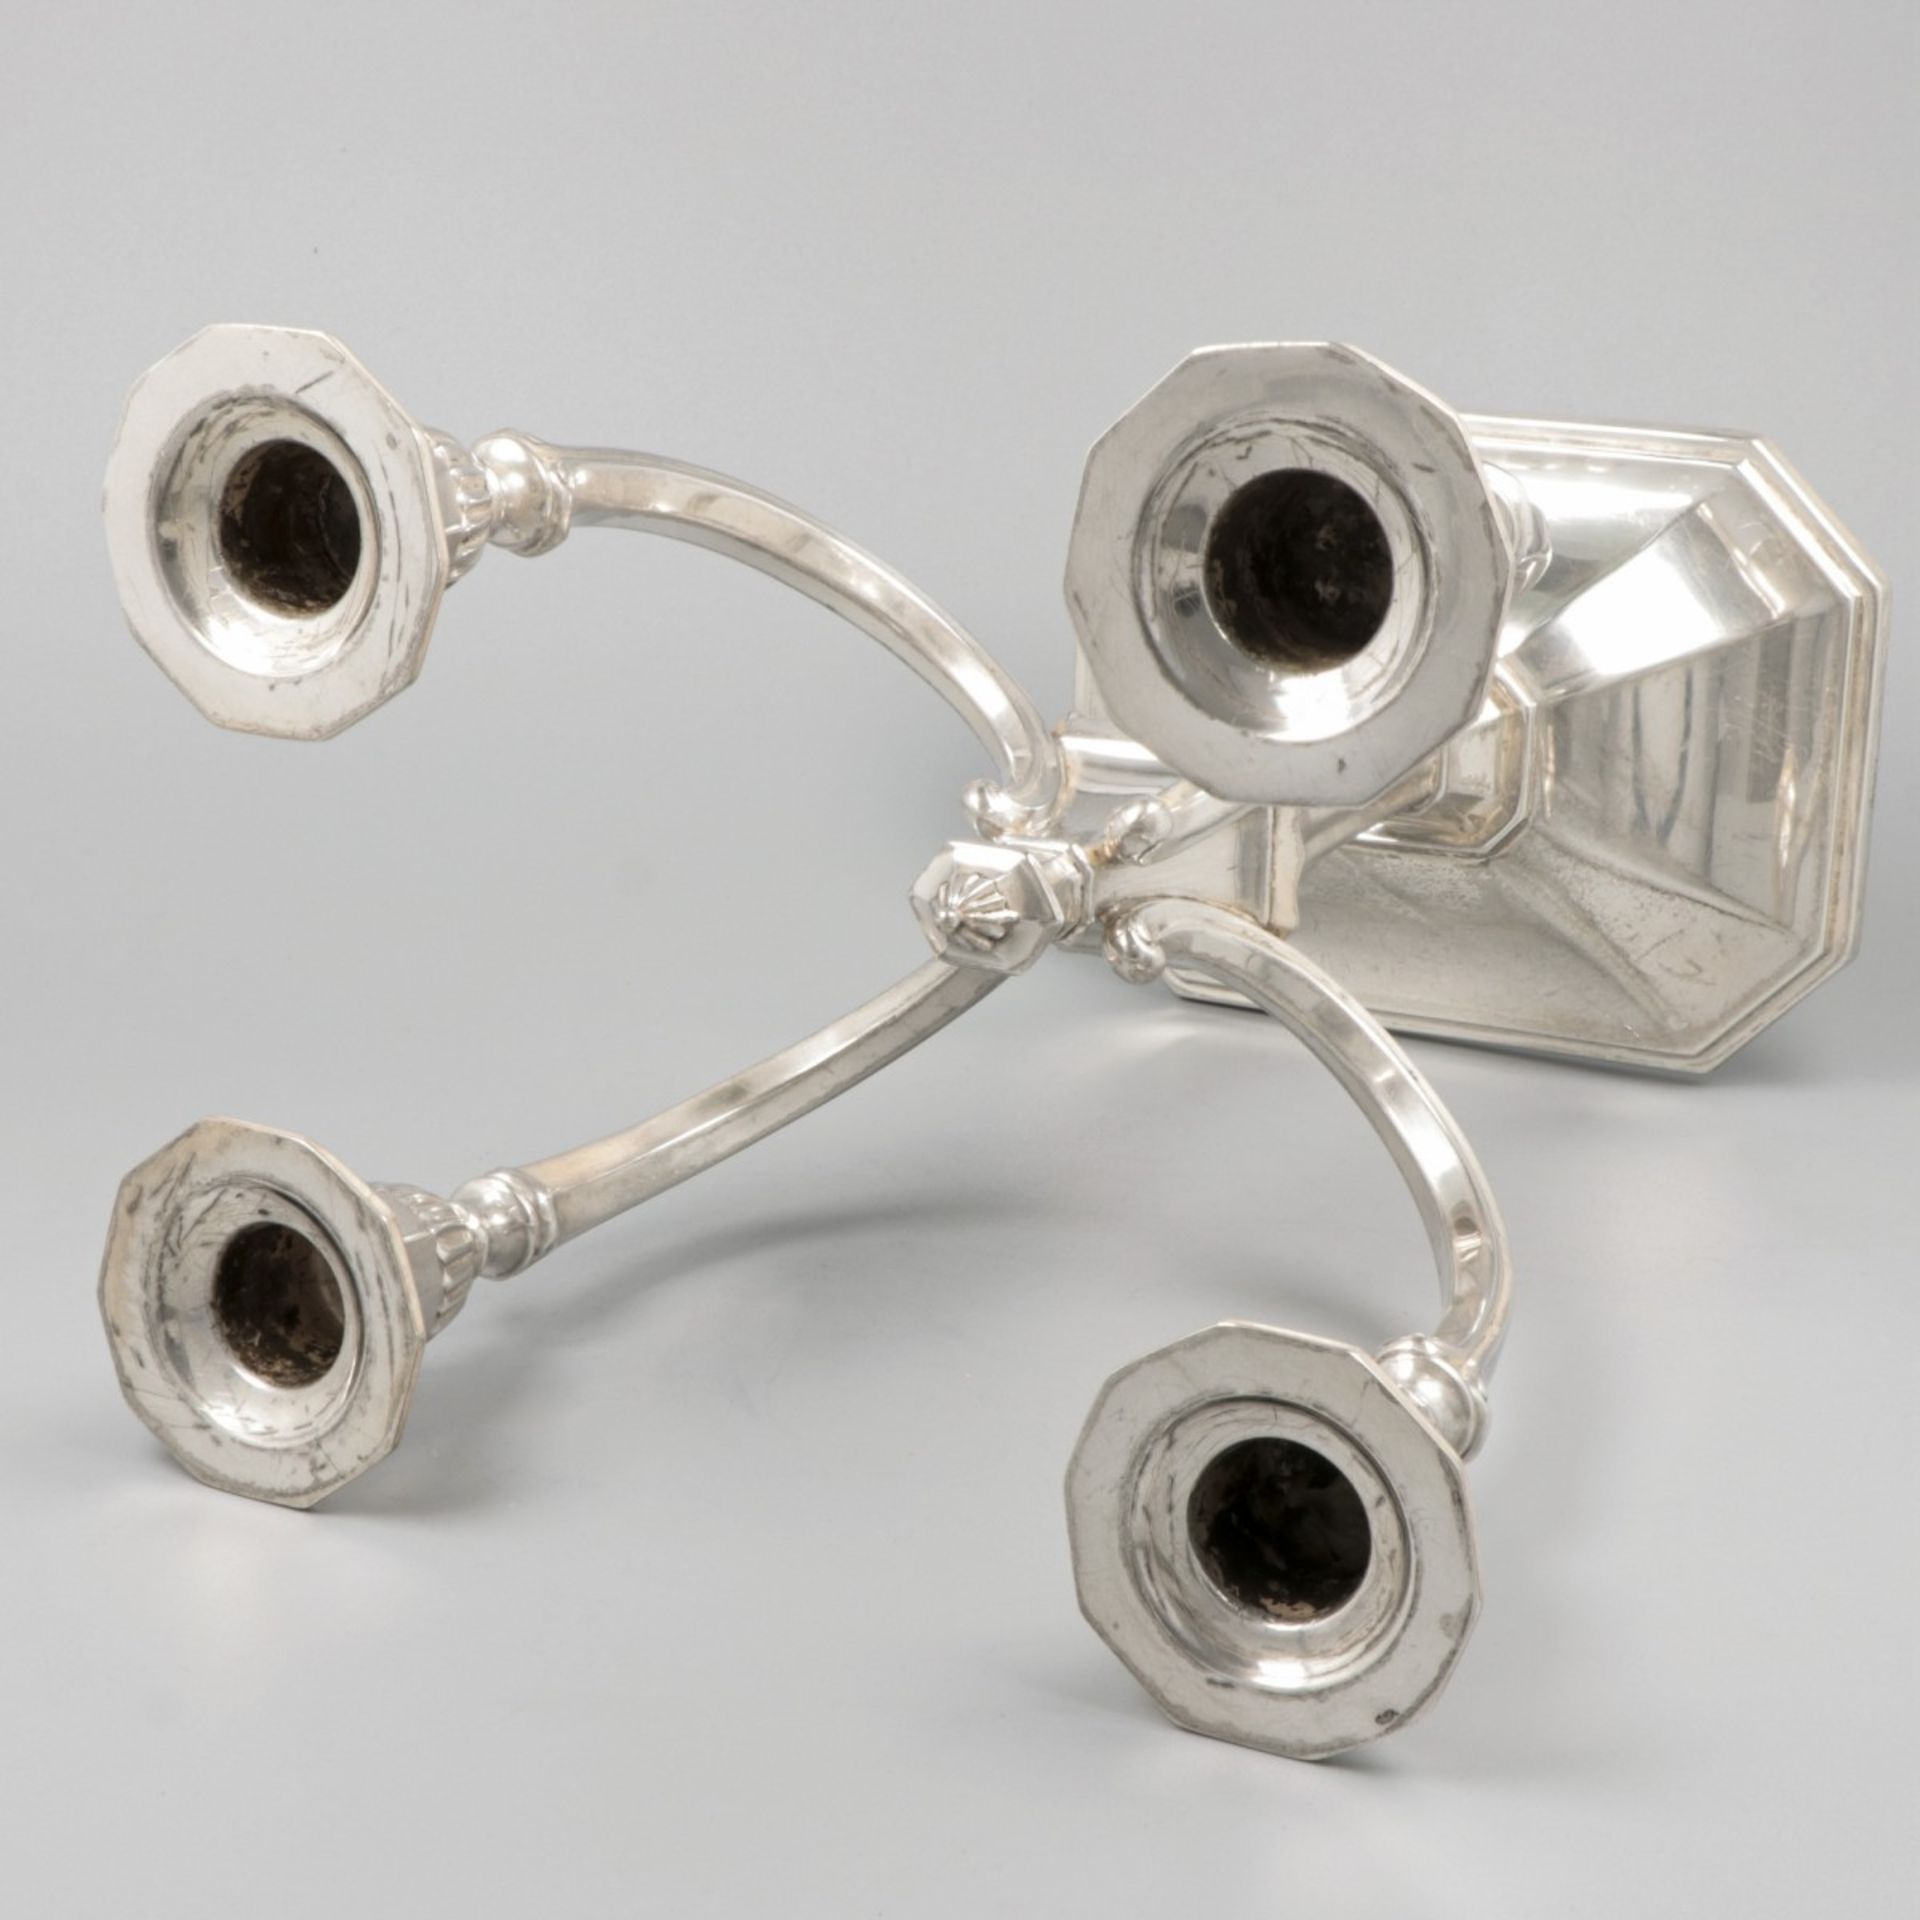 2-piece set of candlesticks silver. - Image 6 of 8